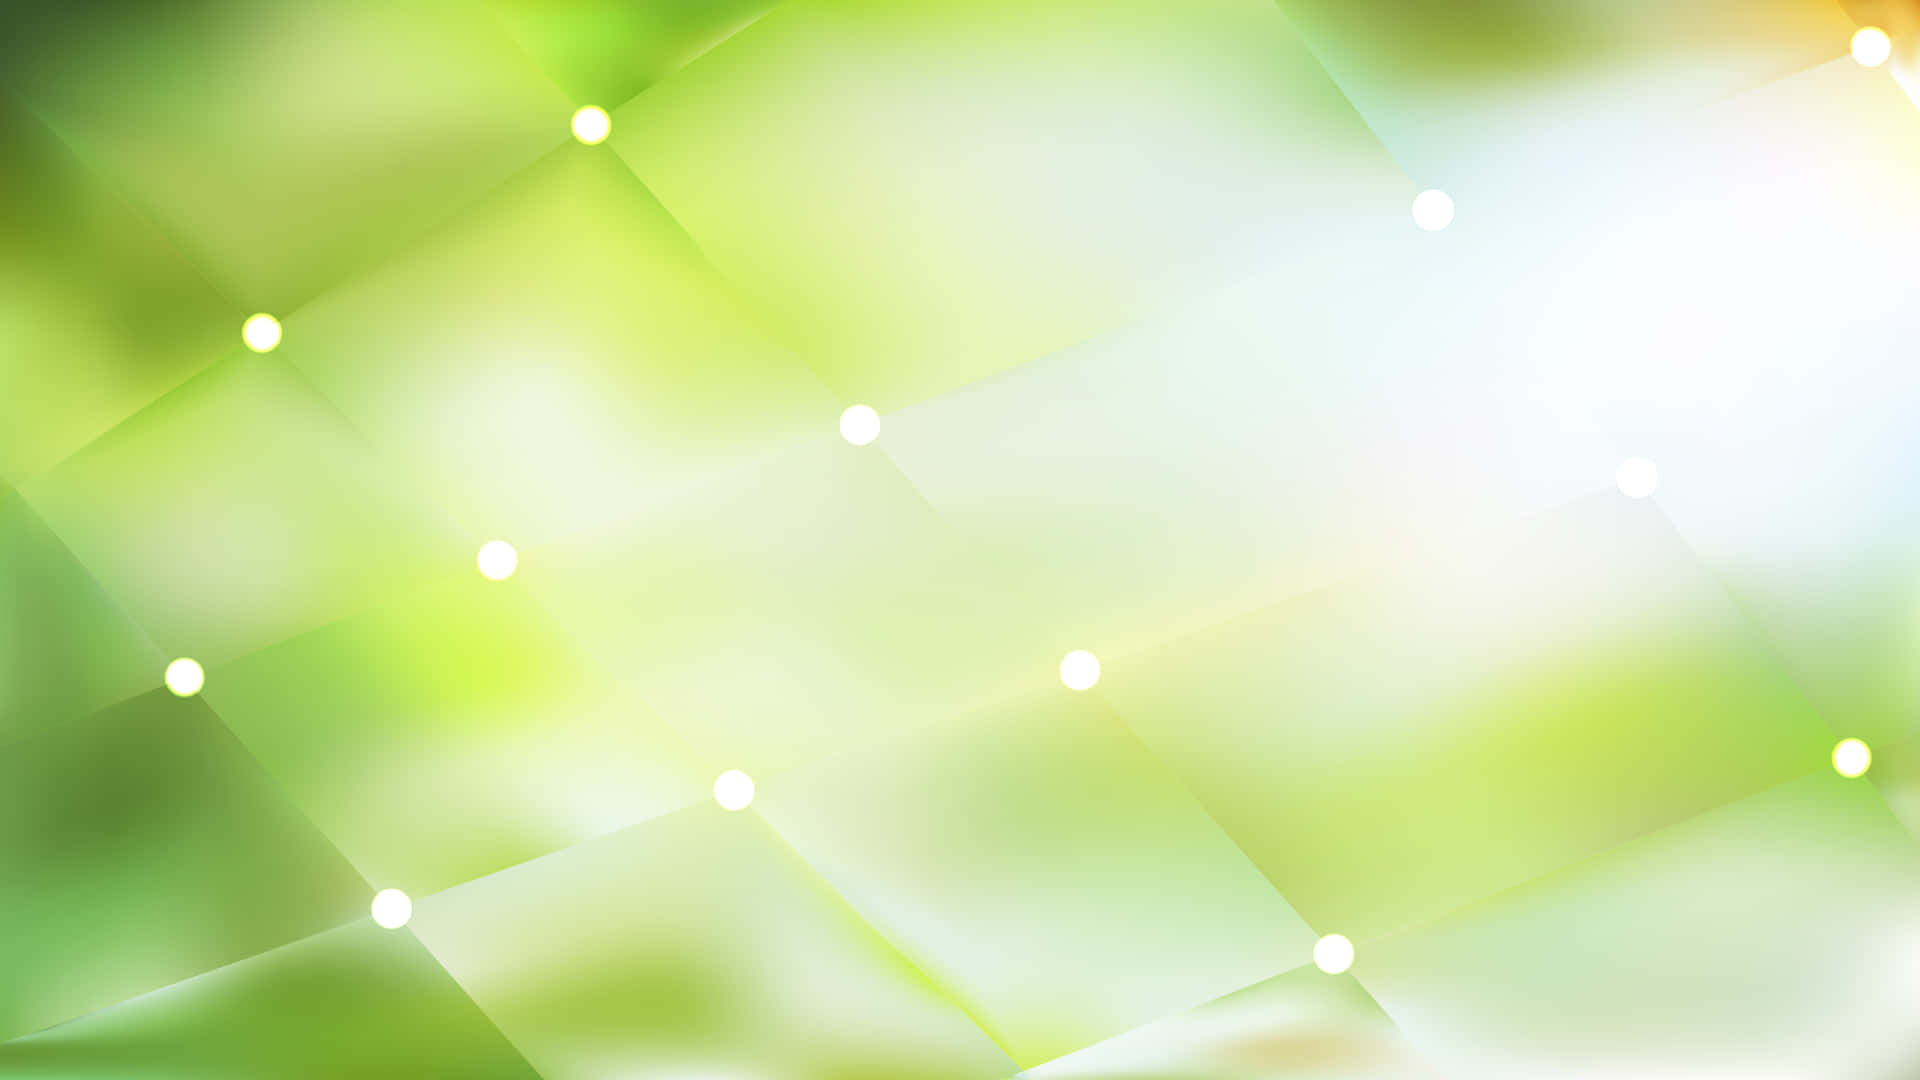 Abstract Geometric Light Green Background